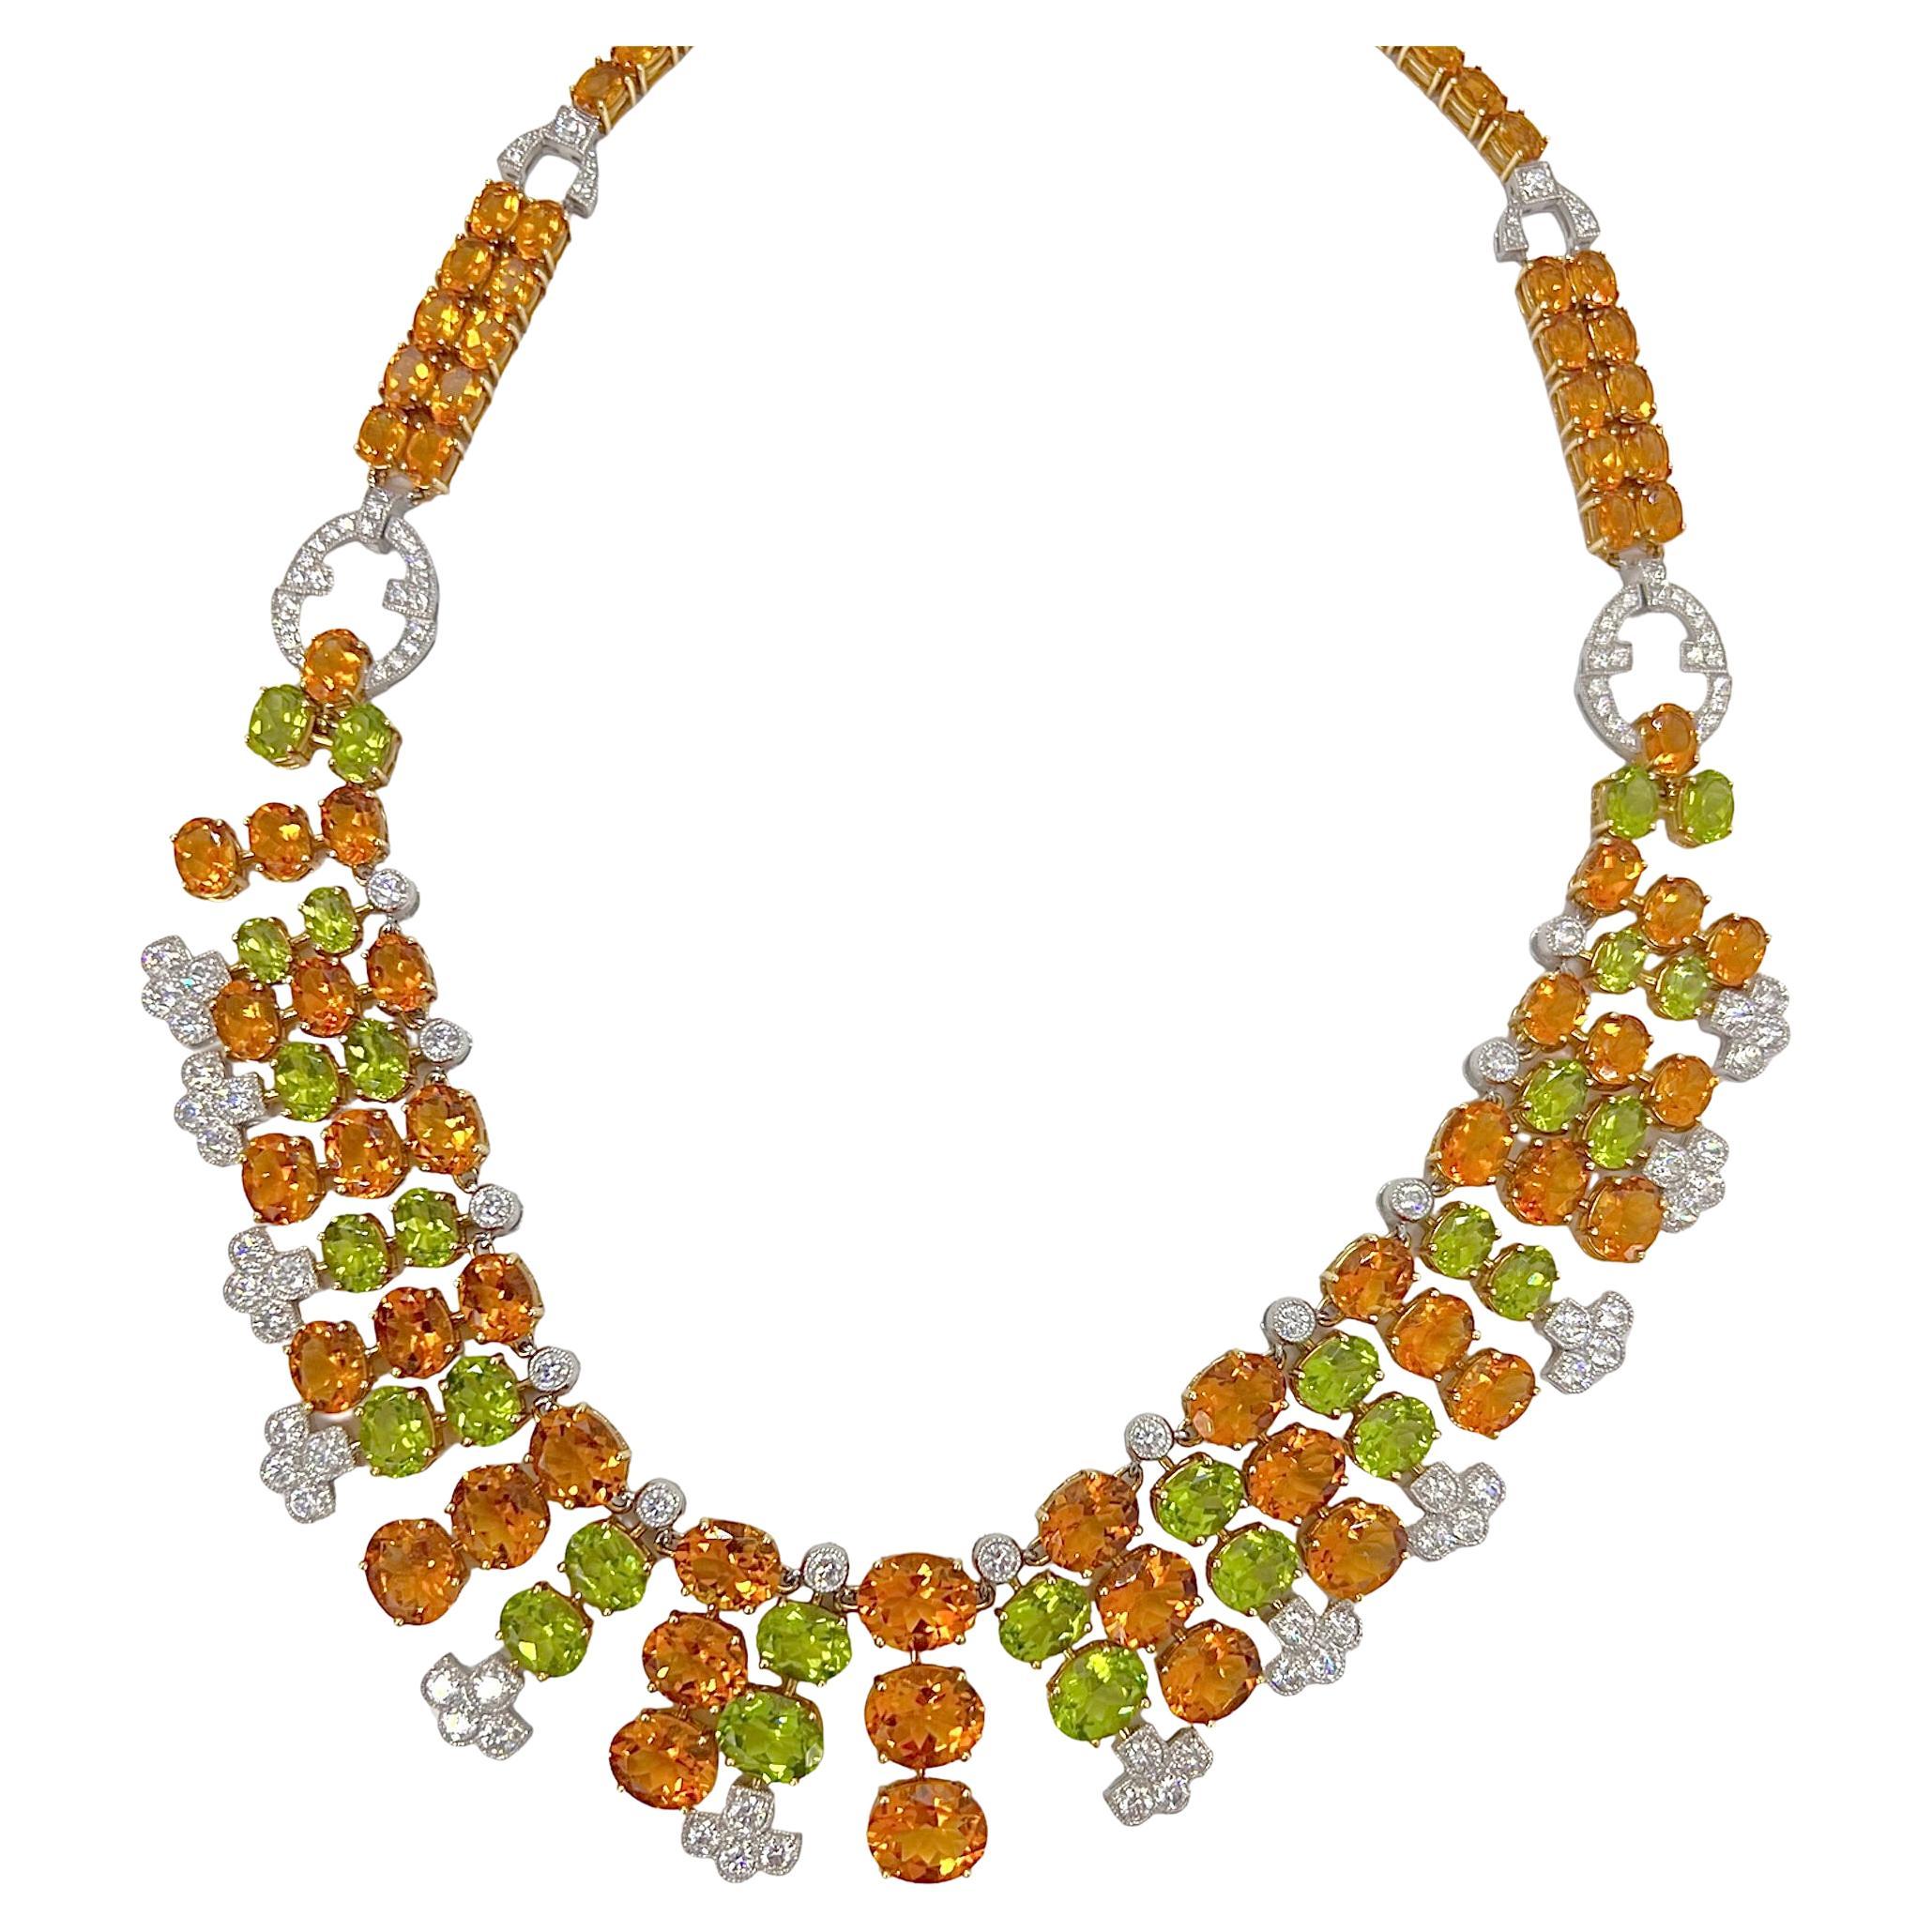 Sophia D. Citrine, Peridot and Diamond Necklace in Yellow Gold